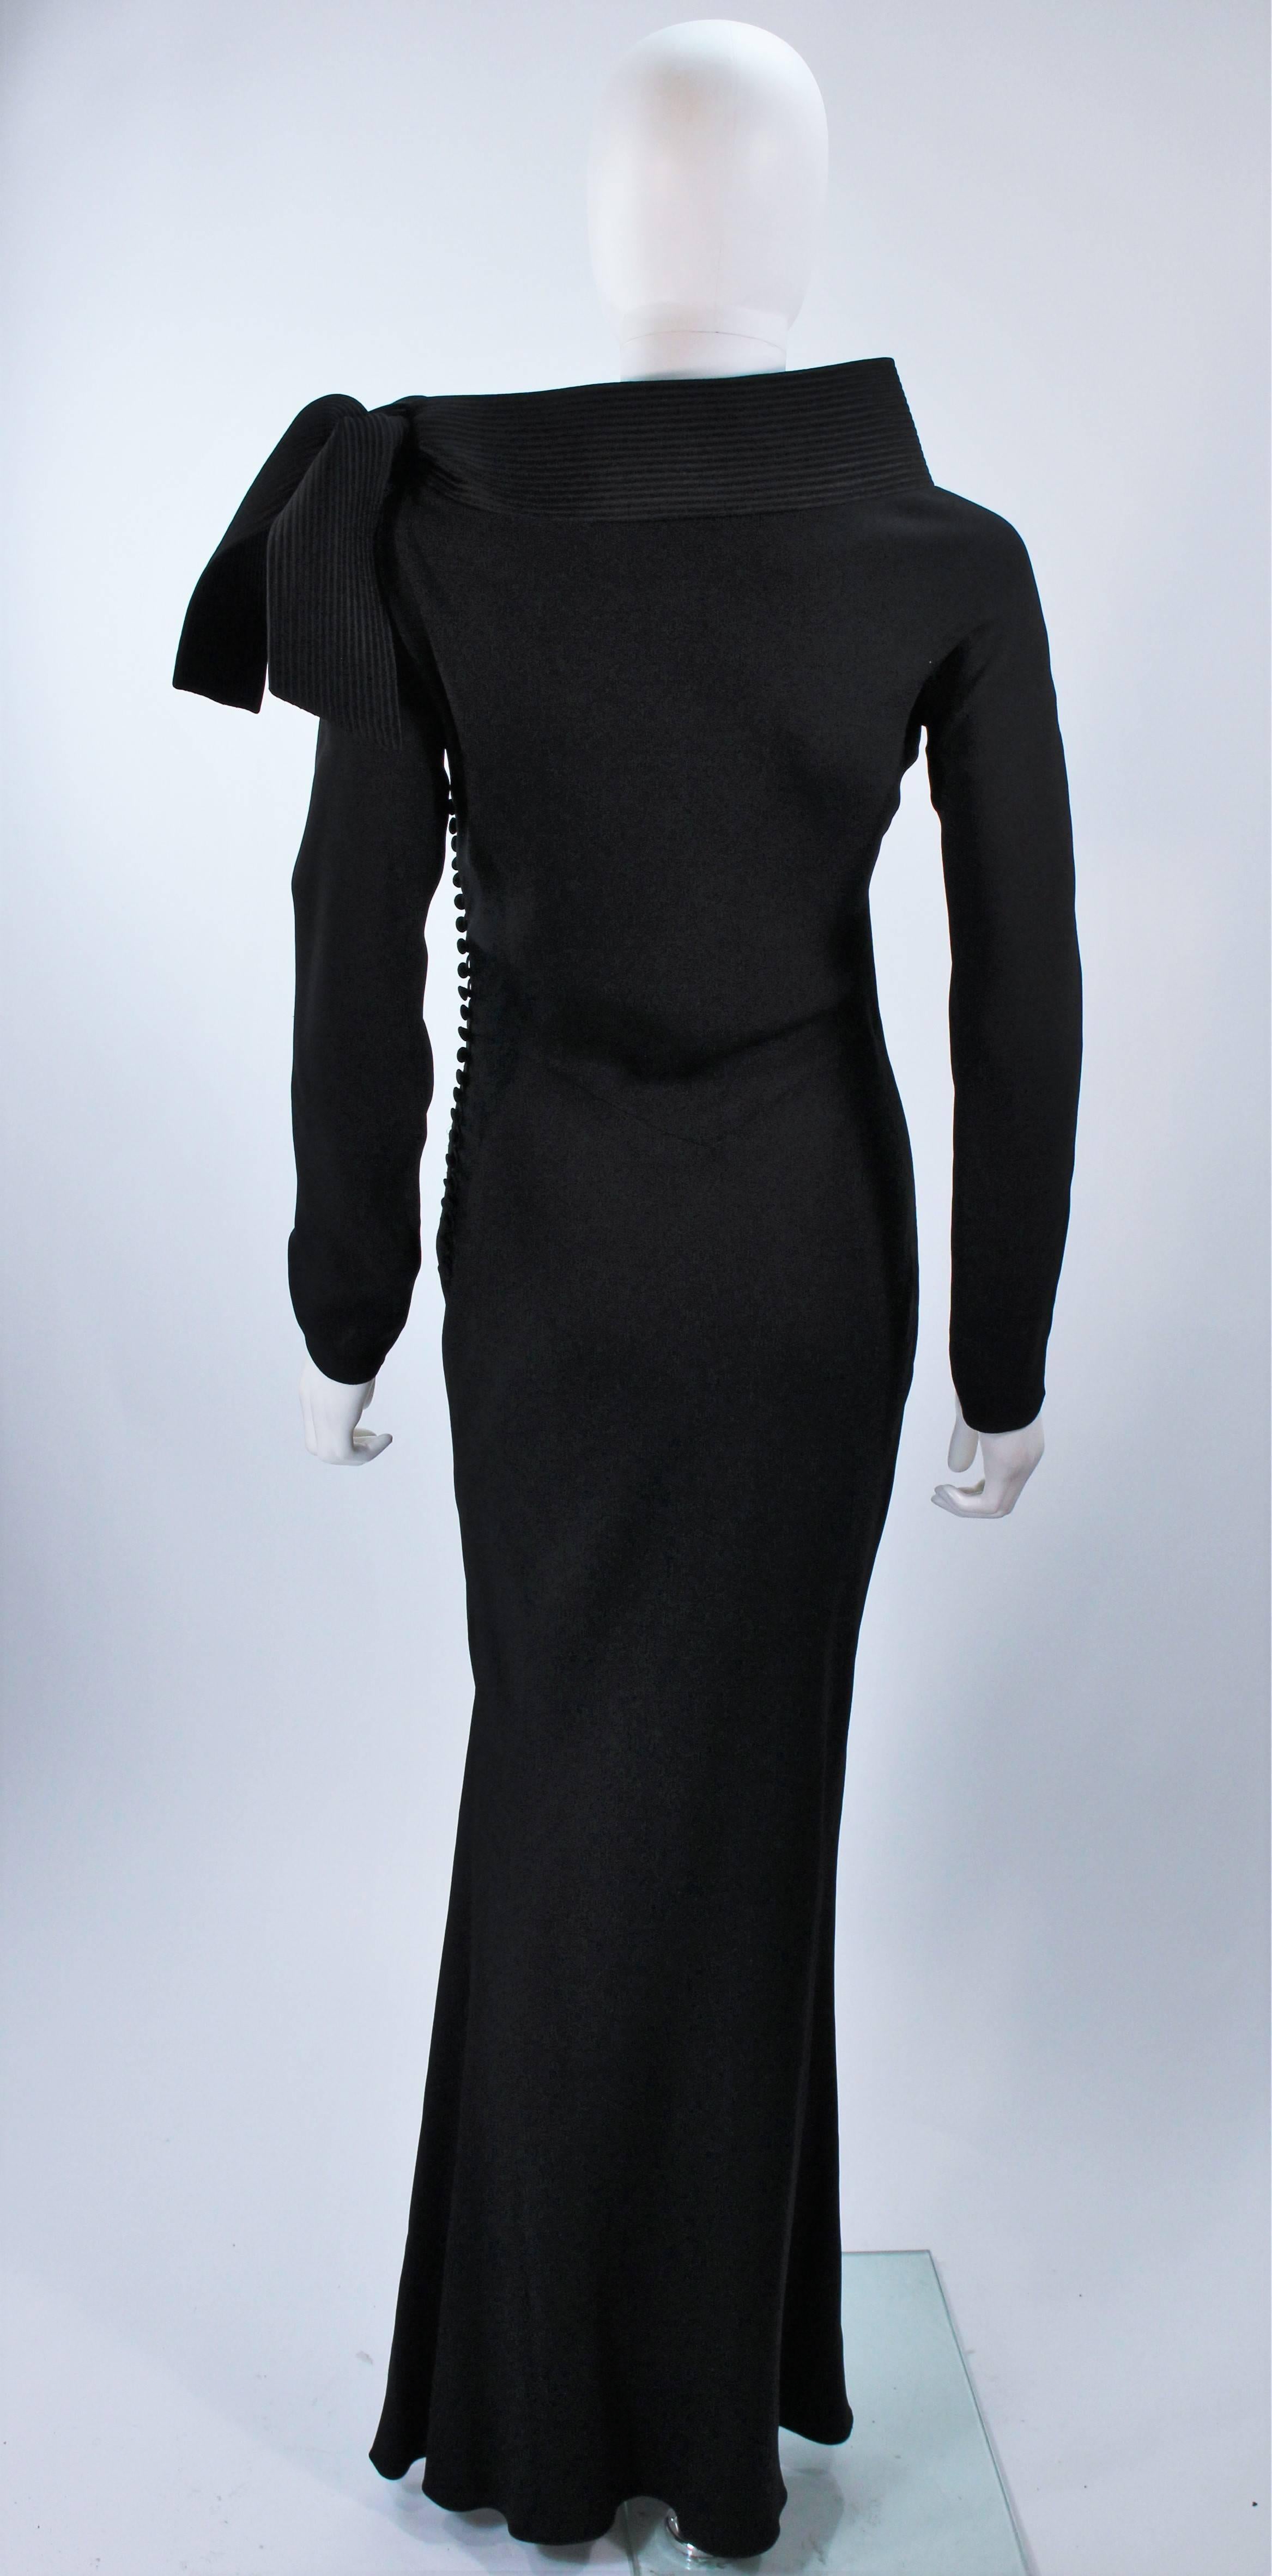 JOHN GALLIANO For CHRISTIAN DIOR Black Gown with Collar Detail Size 38 6 5